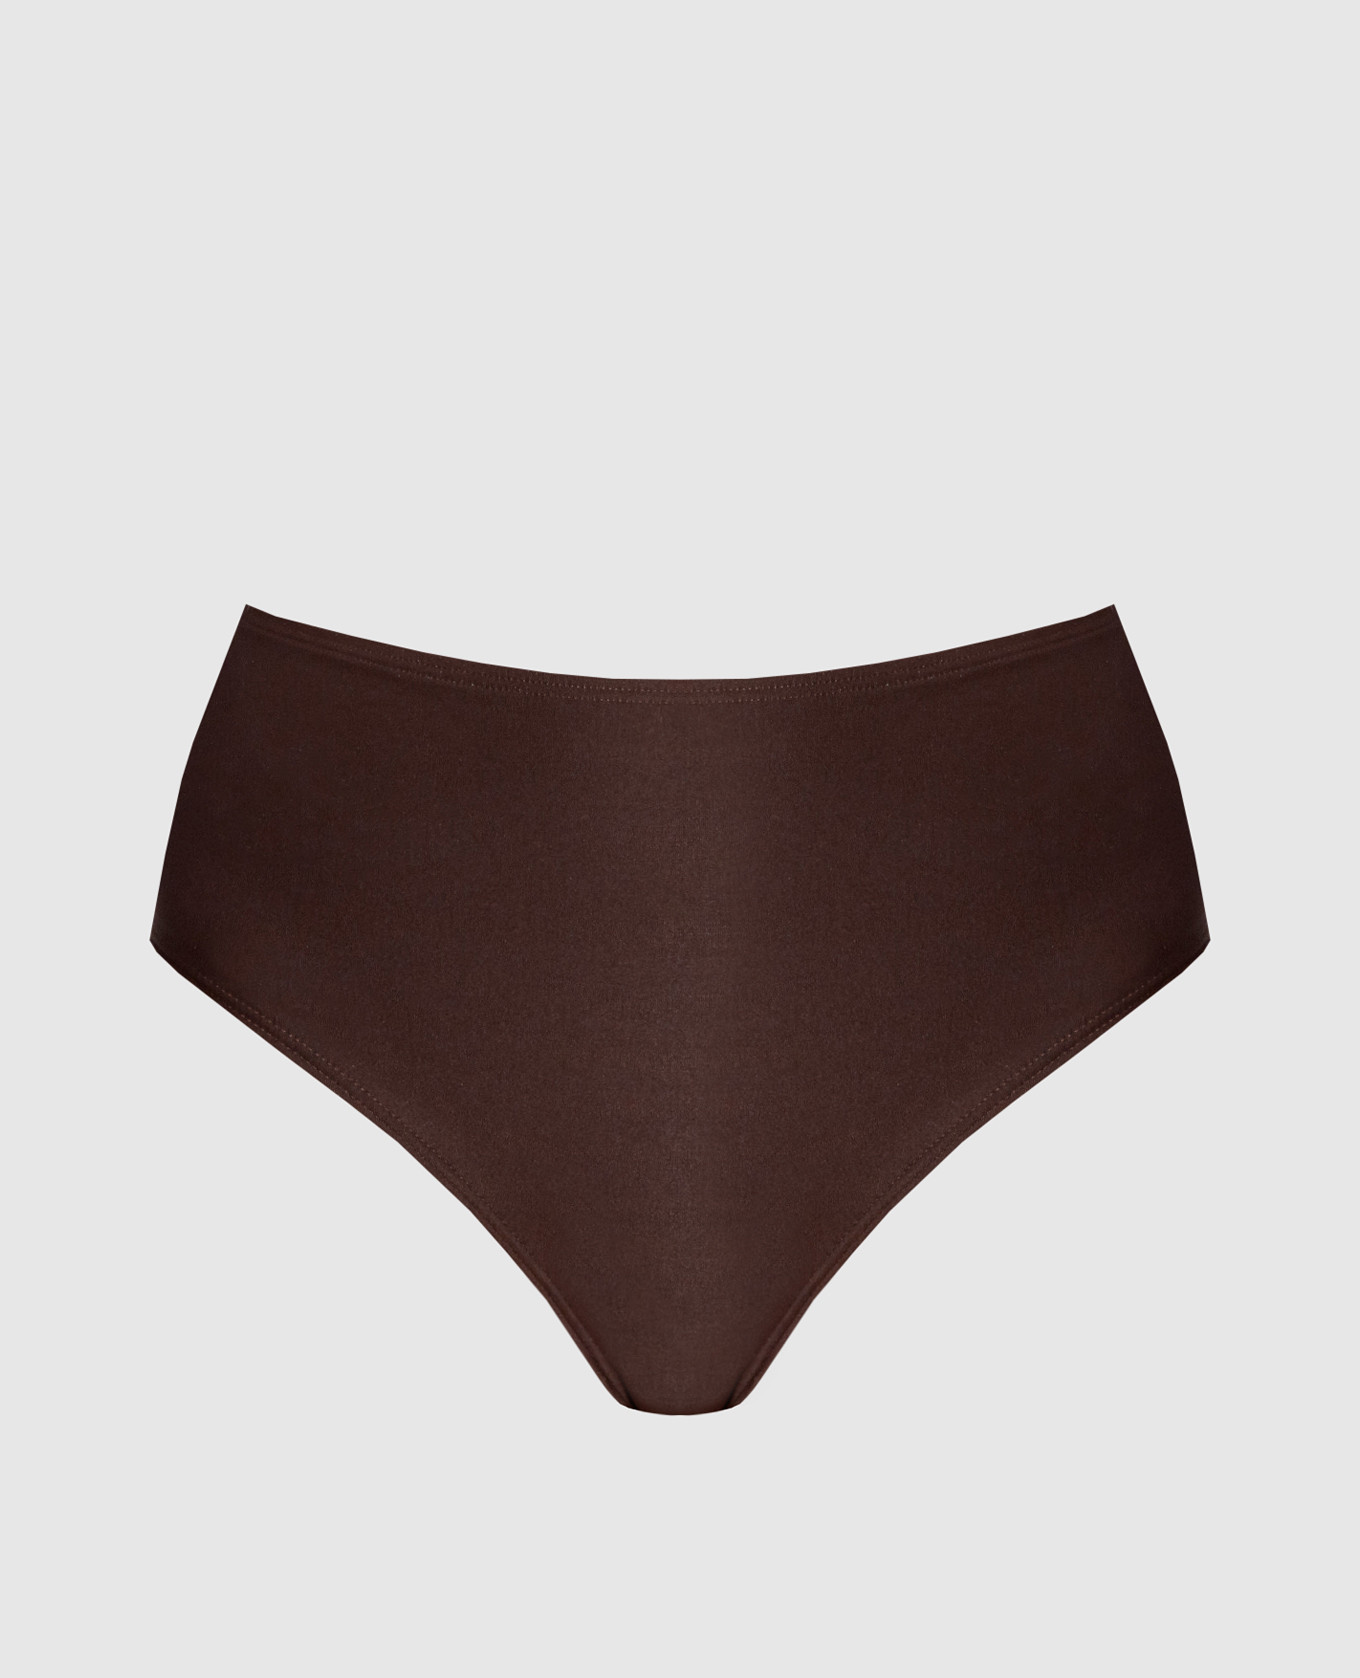 Brown panties from a swimsuit